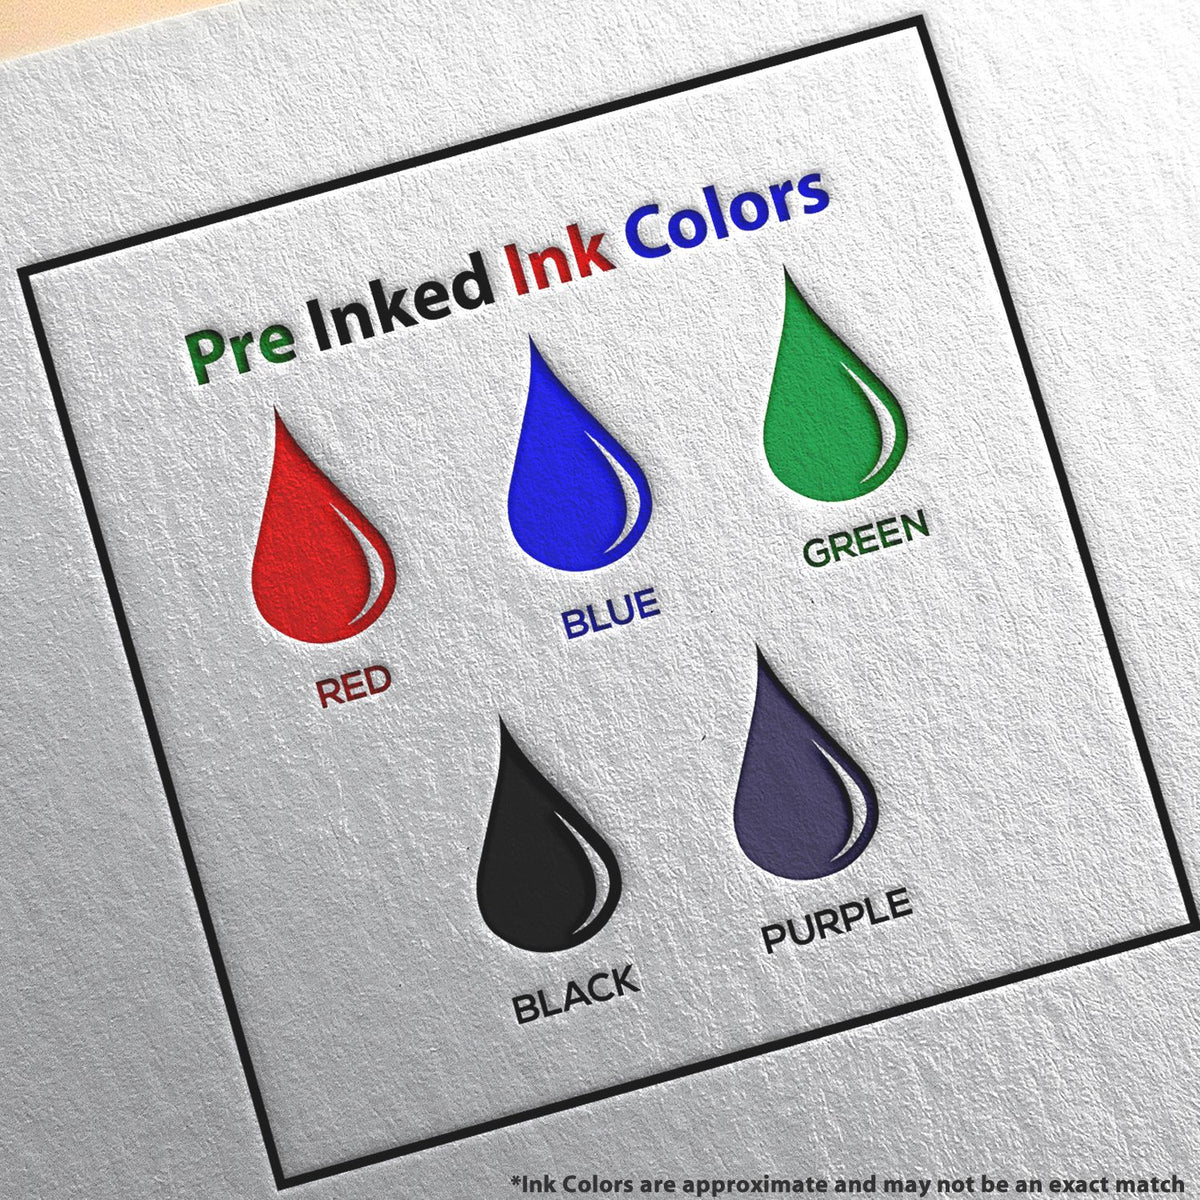 A picture showing the different ink colors or hues available for the Super Slim Kansas Notary Public Stamp product.